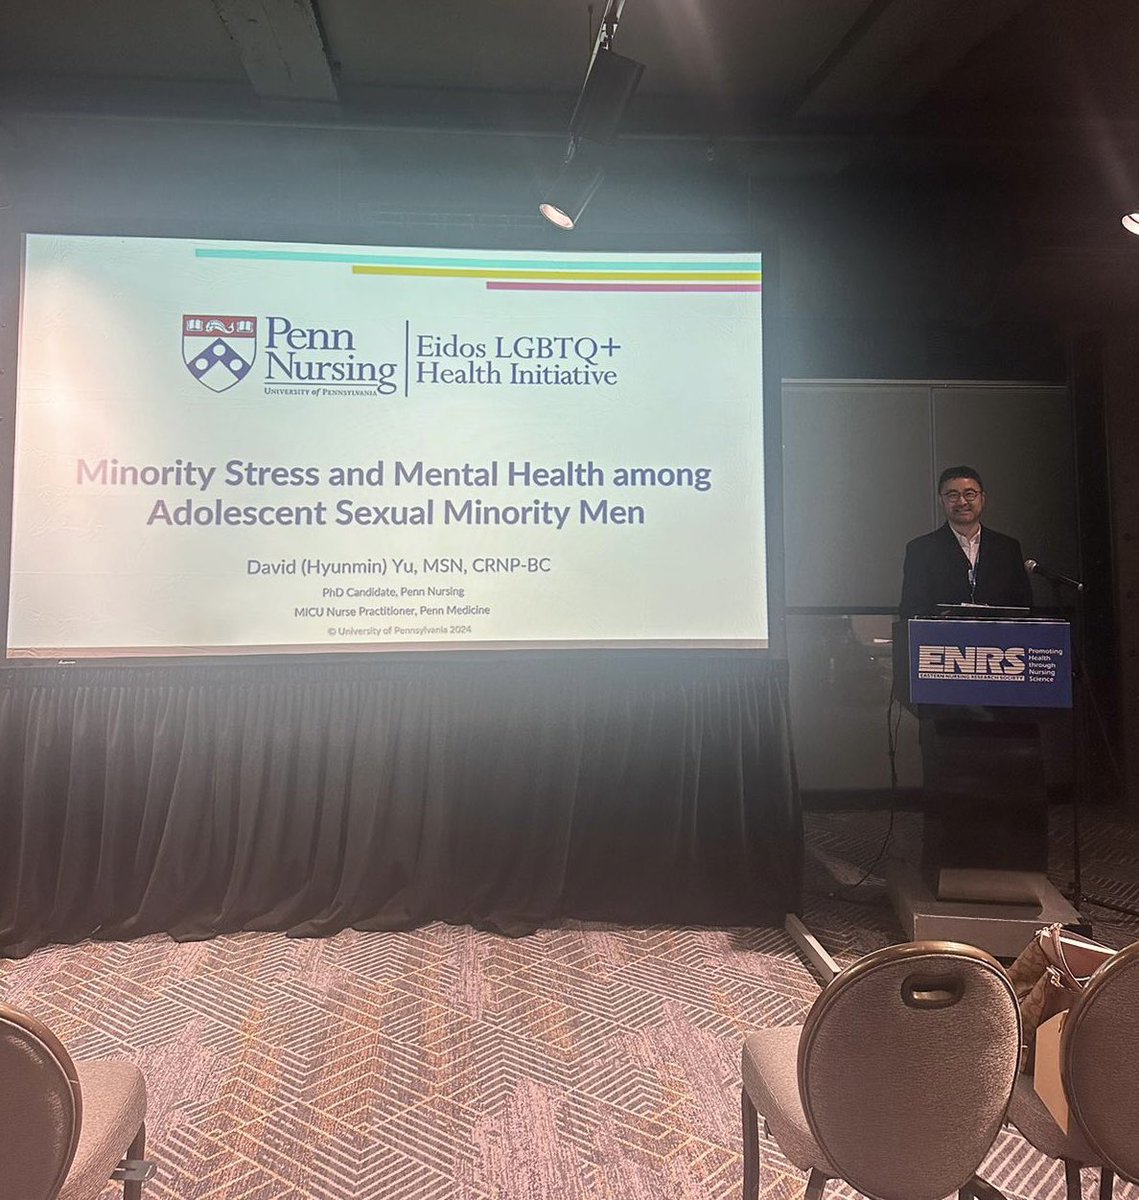 Excited to present our @PennEidos study at the @ENRS_Science 36th Annual Scientific Sessions. Many thanks to my advisors and coauthors! @PennNursing #LGBTQIA #Health